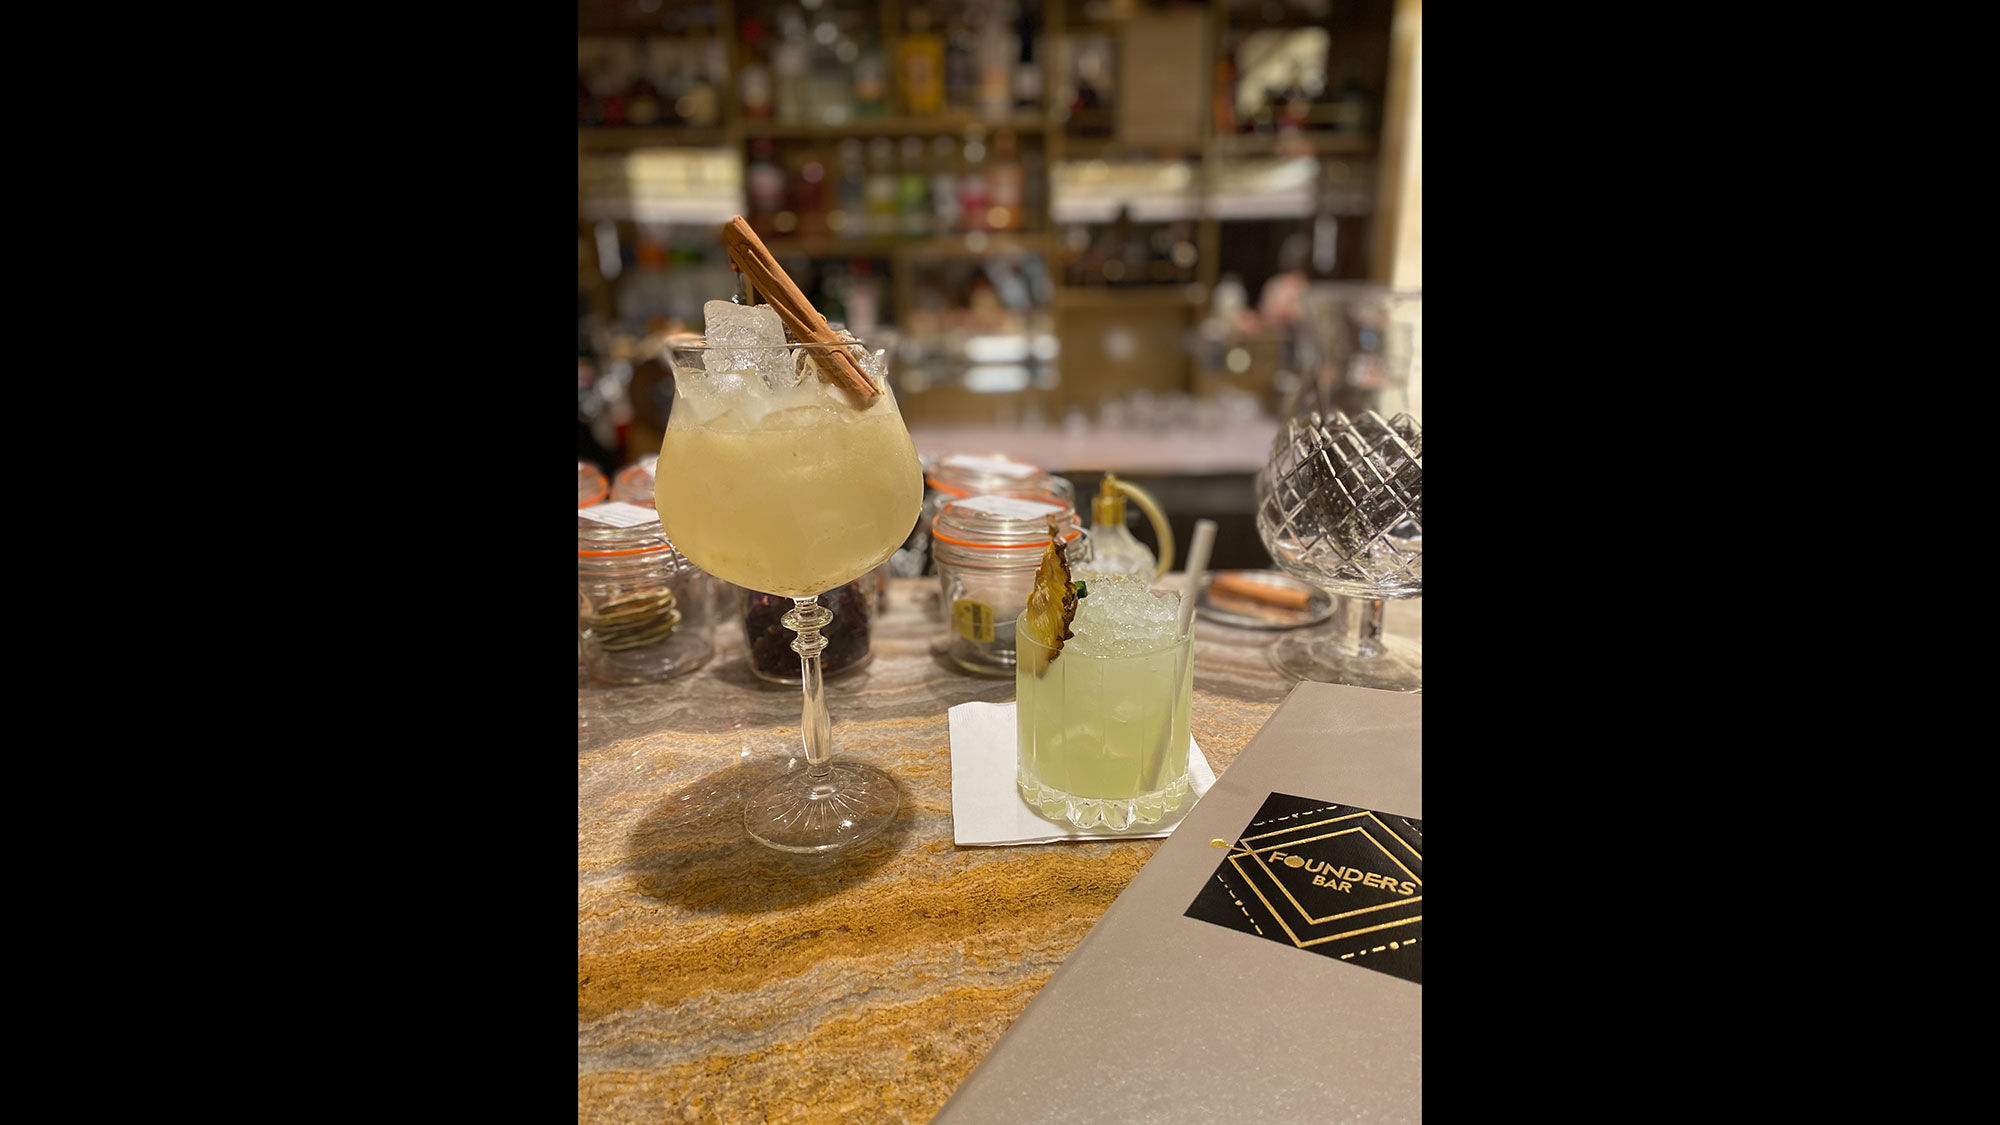 The Figstation is made with Bombay Sapphire gin, lemon juice, fig jam and Fever Tee Indian tonic. On the right is Eric's Mezcalita with juice, pineapple puree, jalapeno and grilled pineapple. Both are served in the Founders Bar.